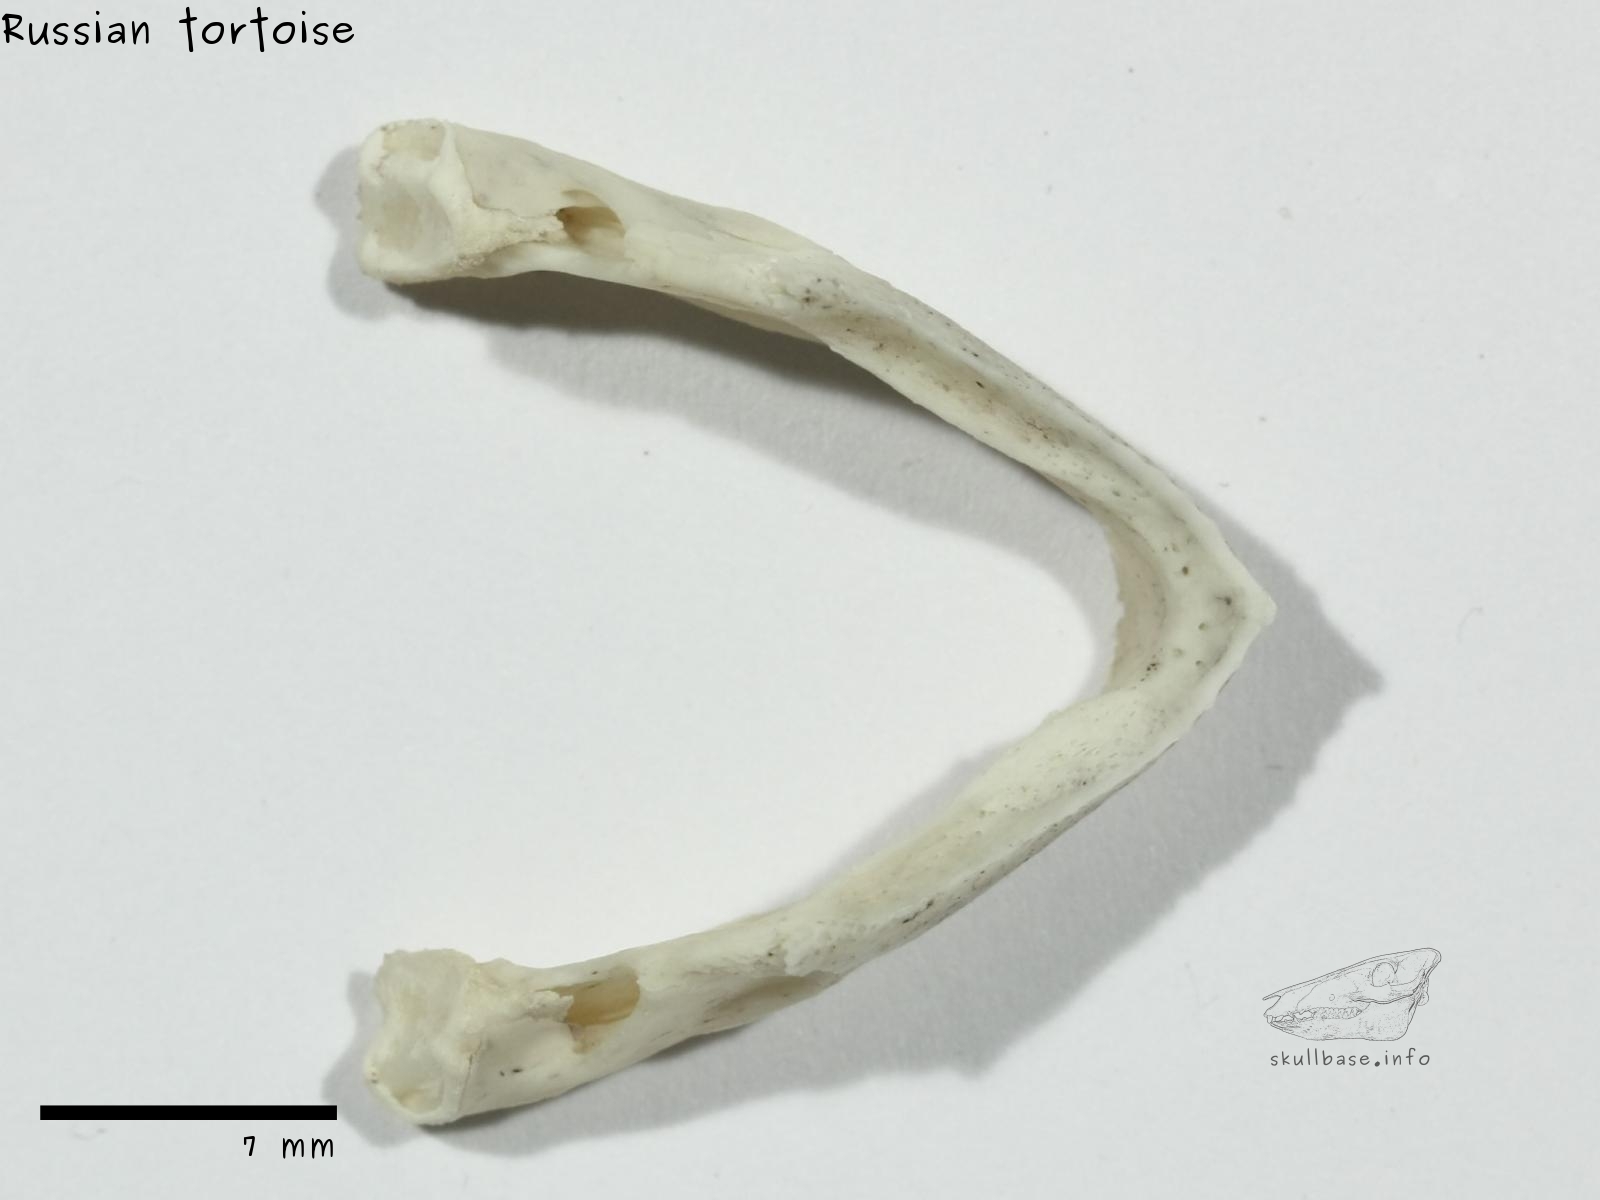 Russian tortoise (Agrionemys horsfieldii) jaw